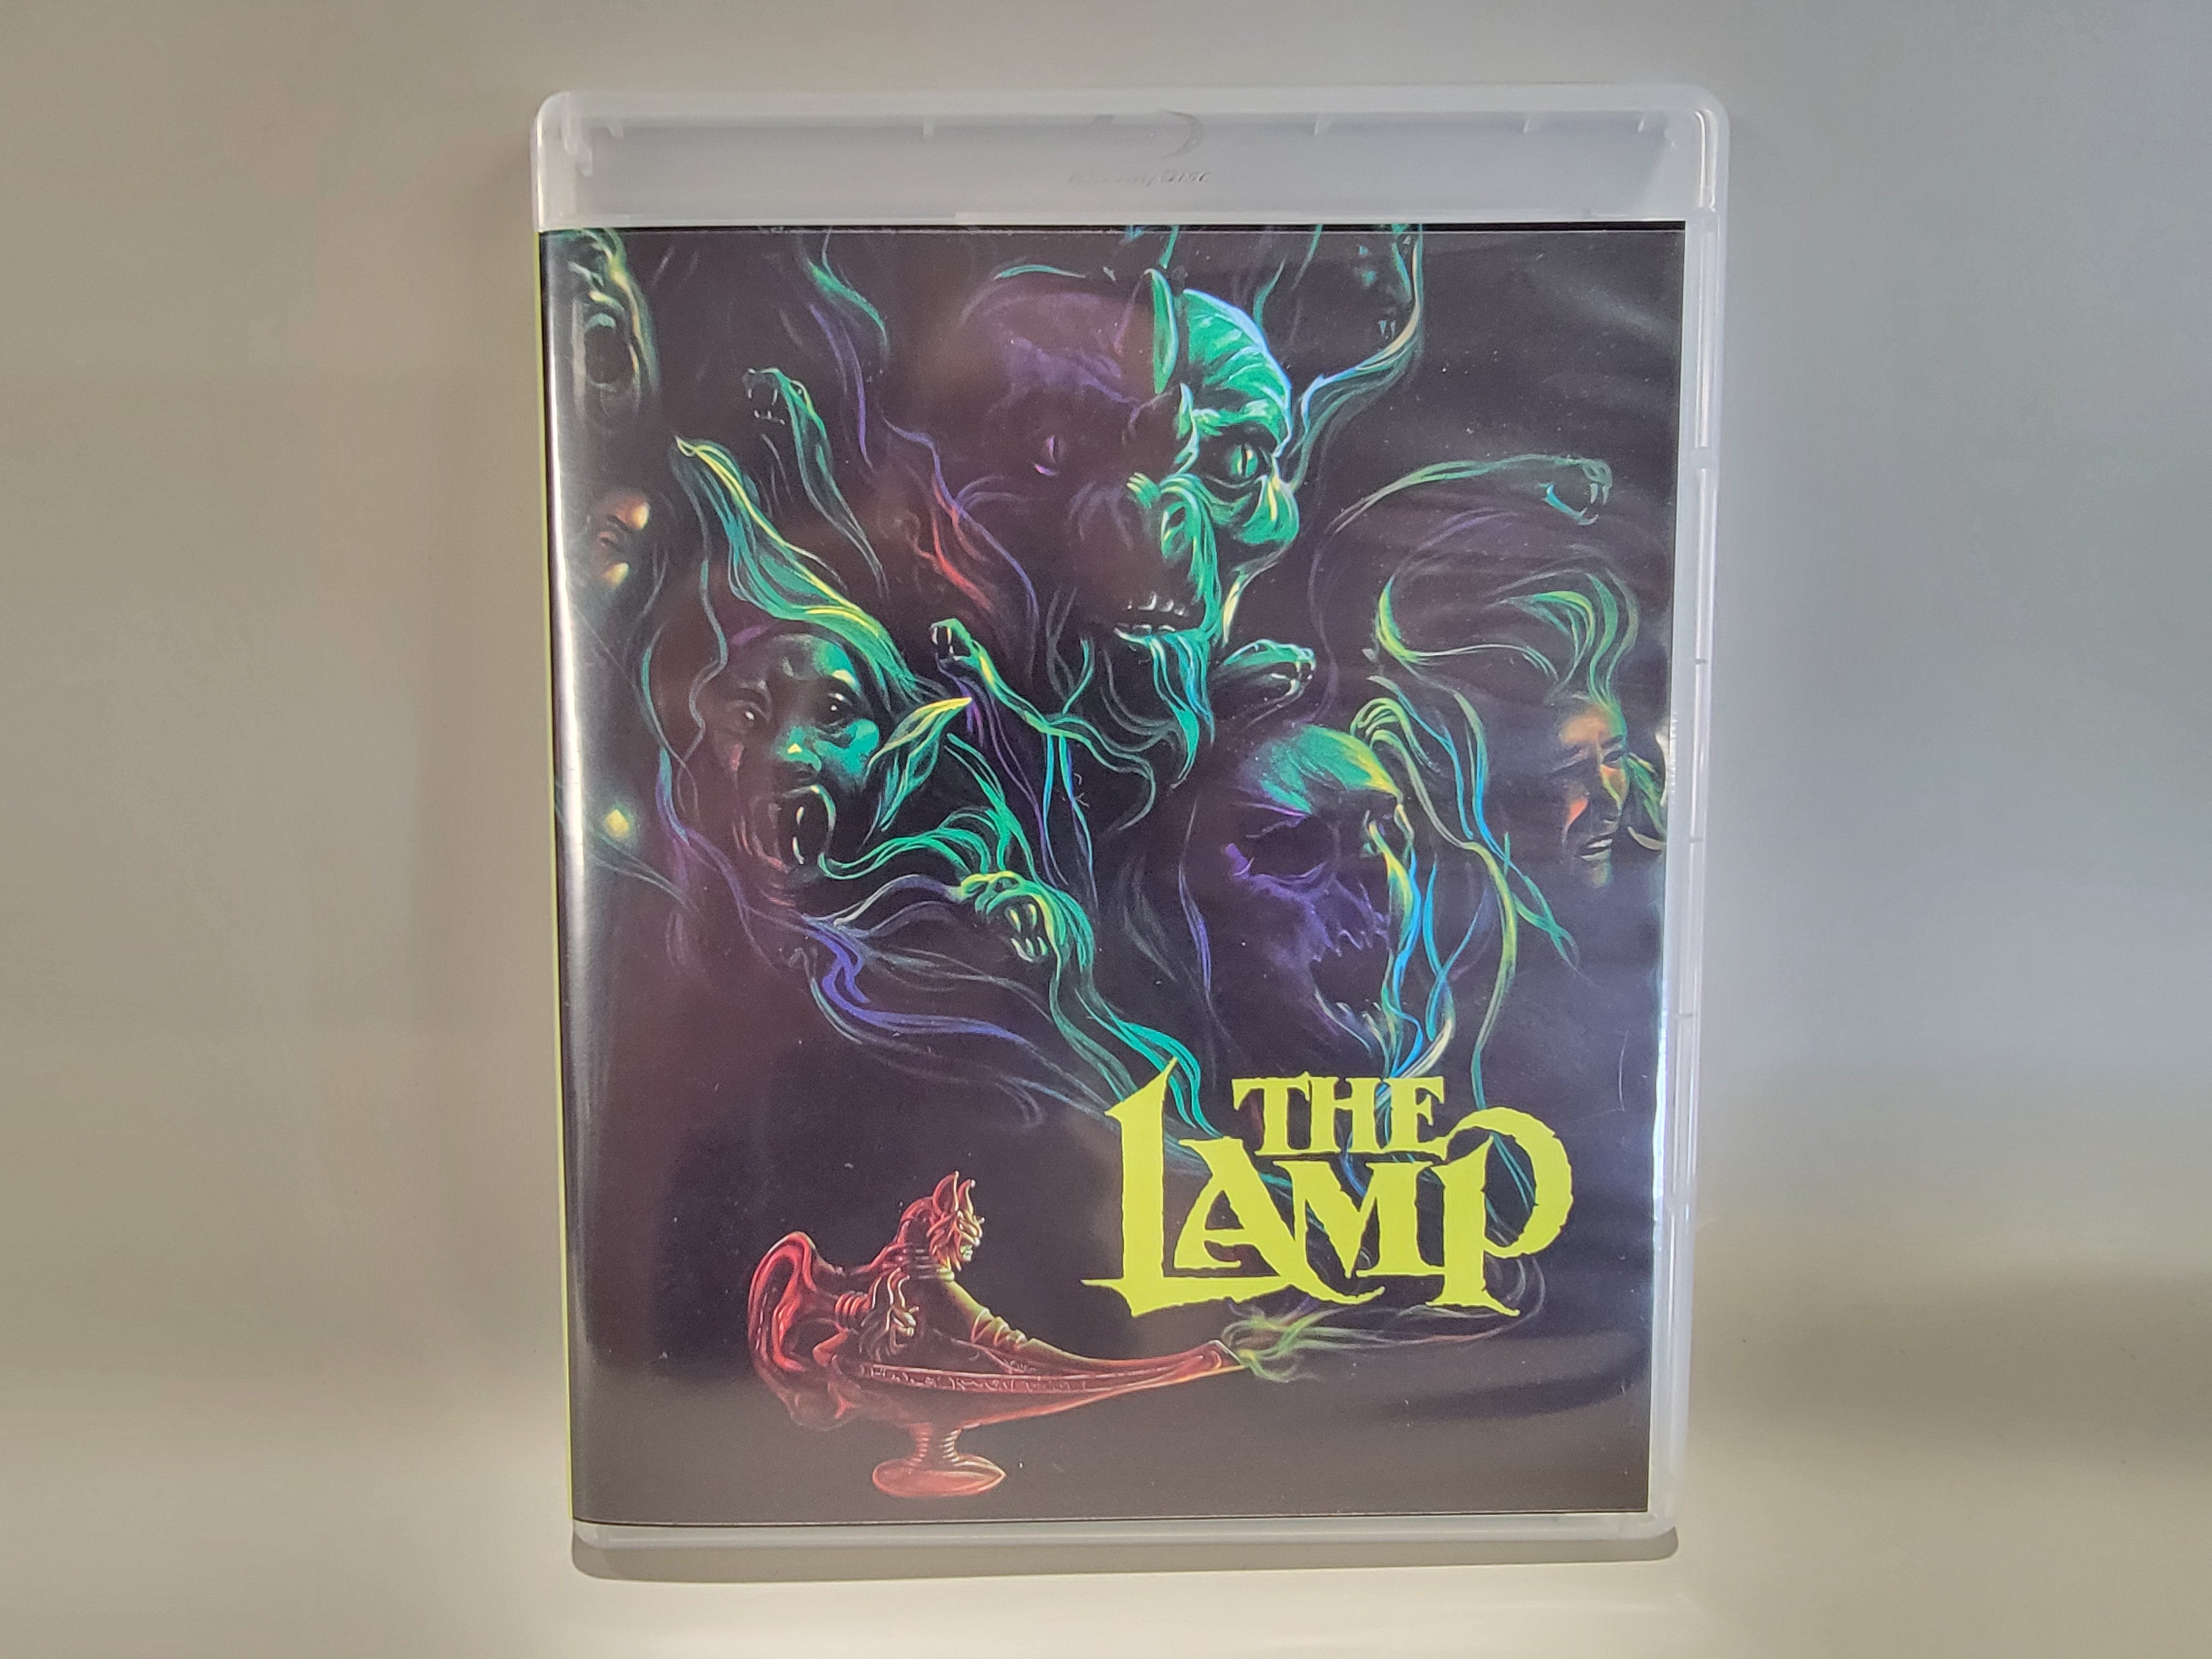 THE LAMP BLU-RAY [USED]